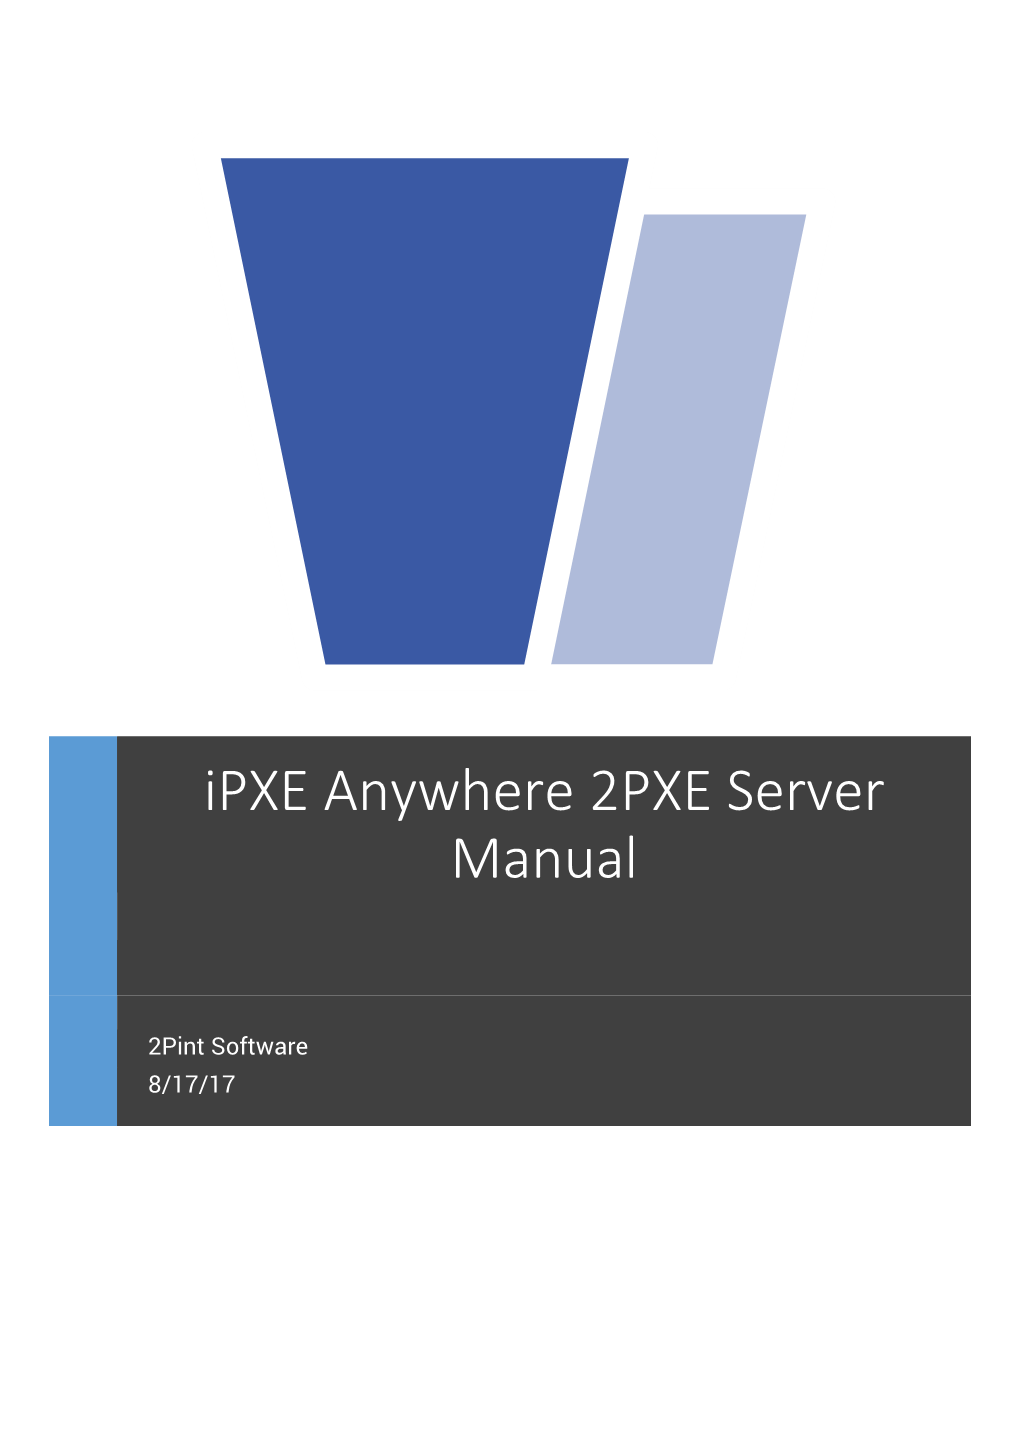 Ipxe Anywhere 2PXE Server Manual